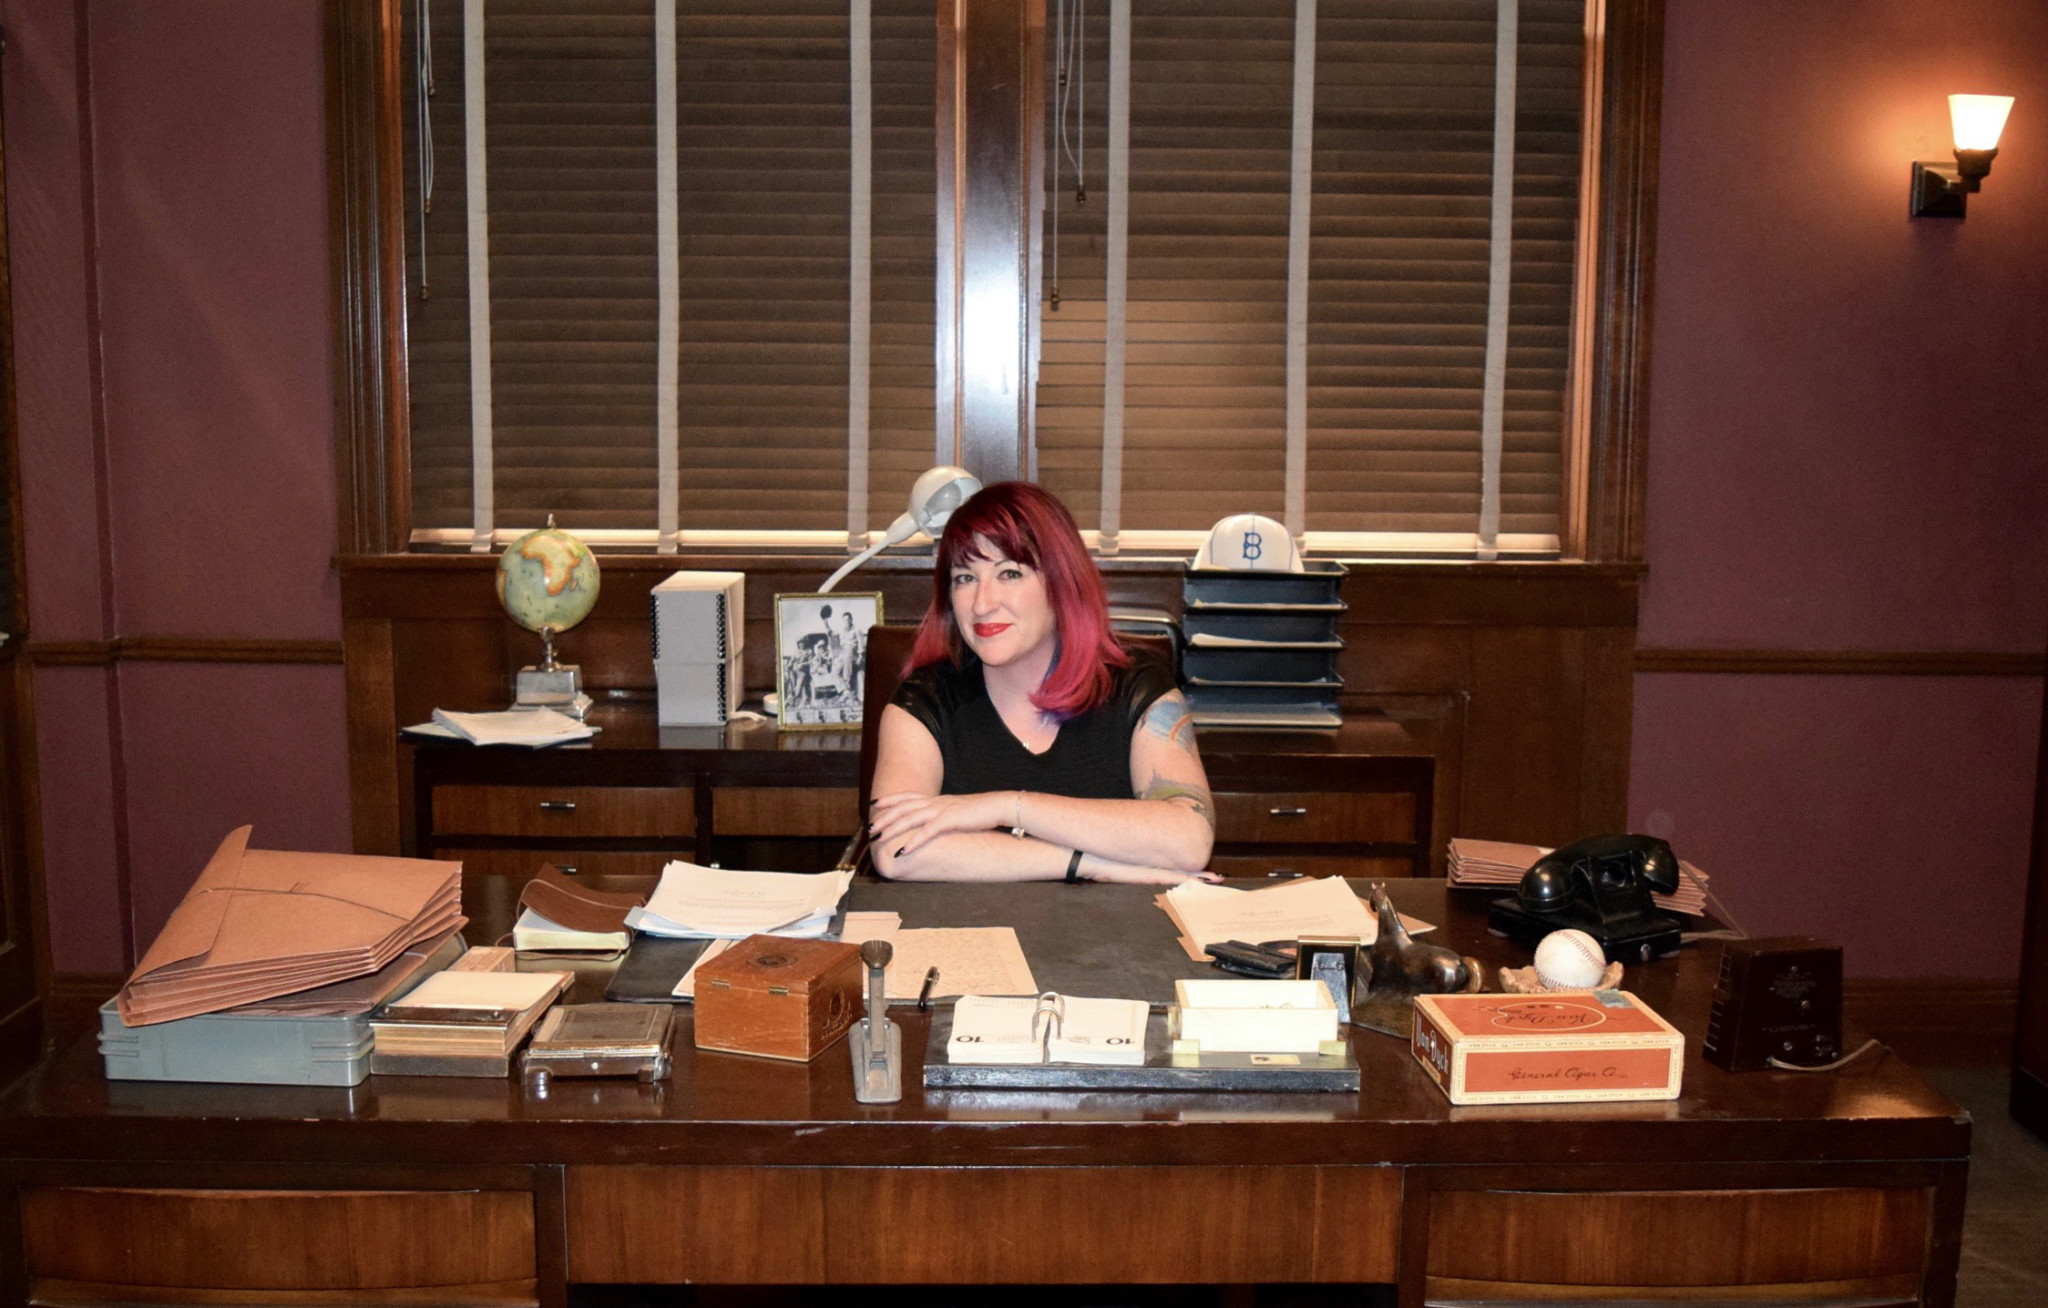 On The Set Of Abc’s Agent Carter And The History Of The Red Hat (plus Where To Find It!)